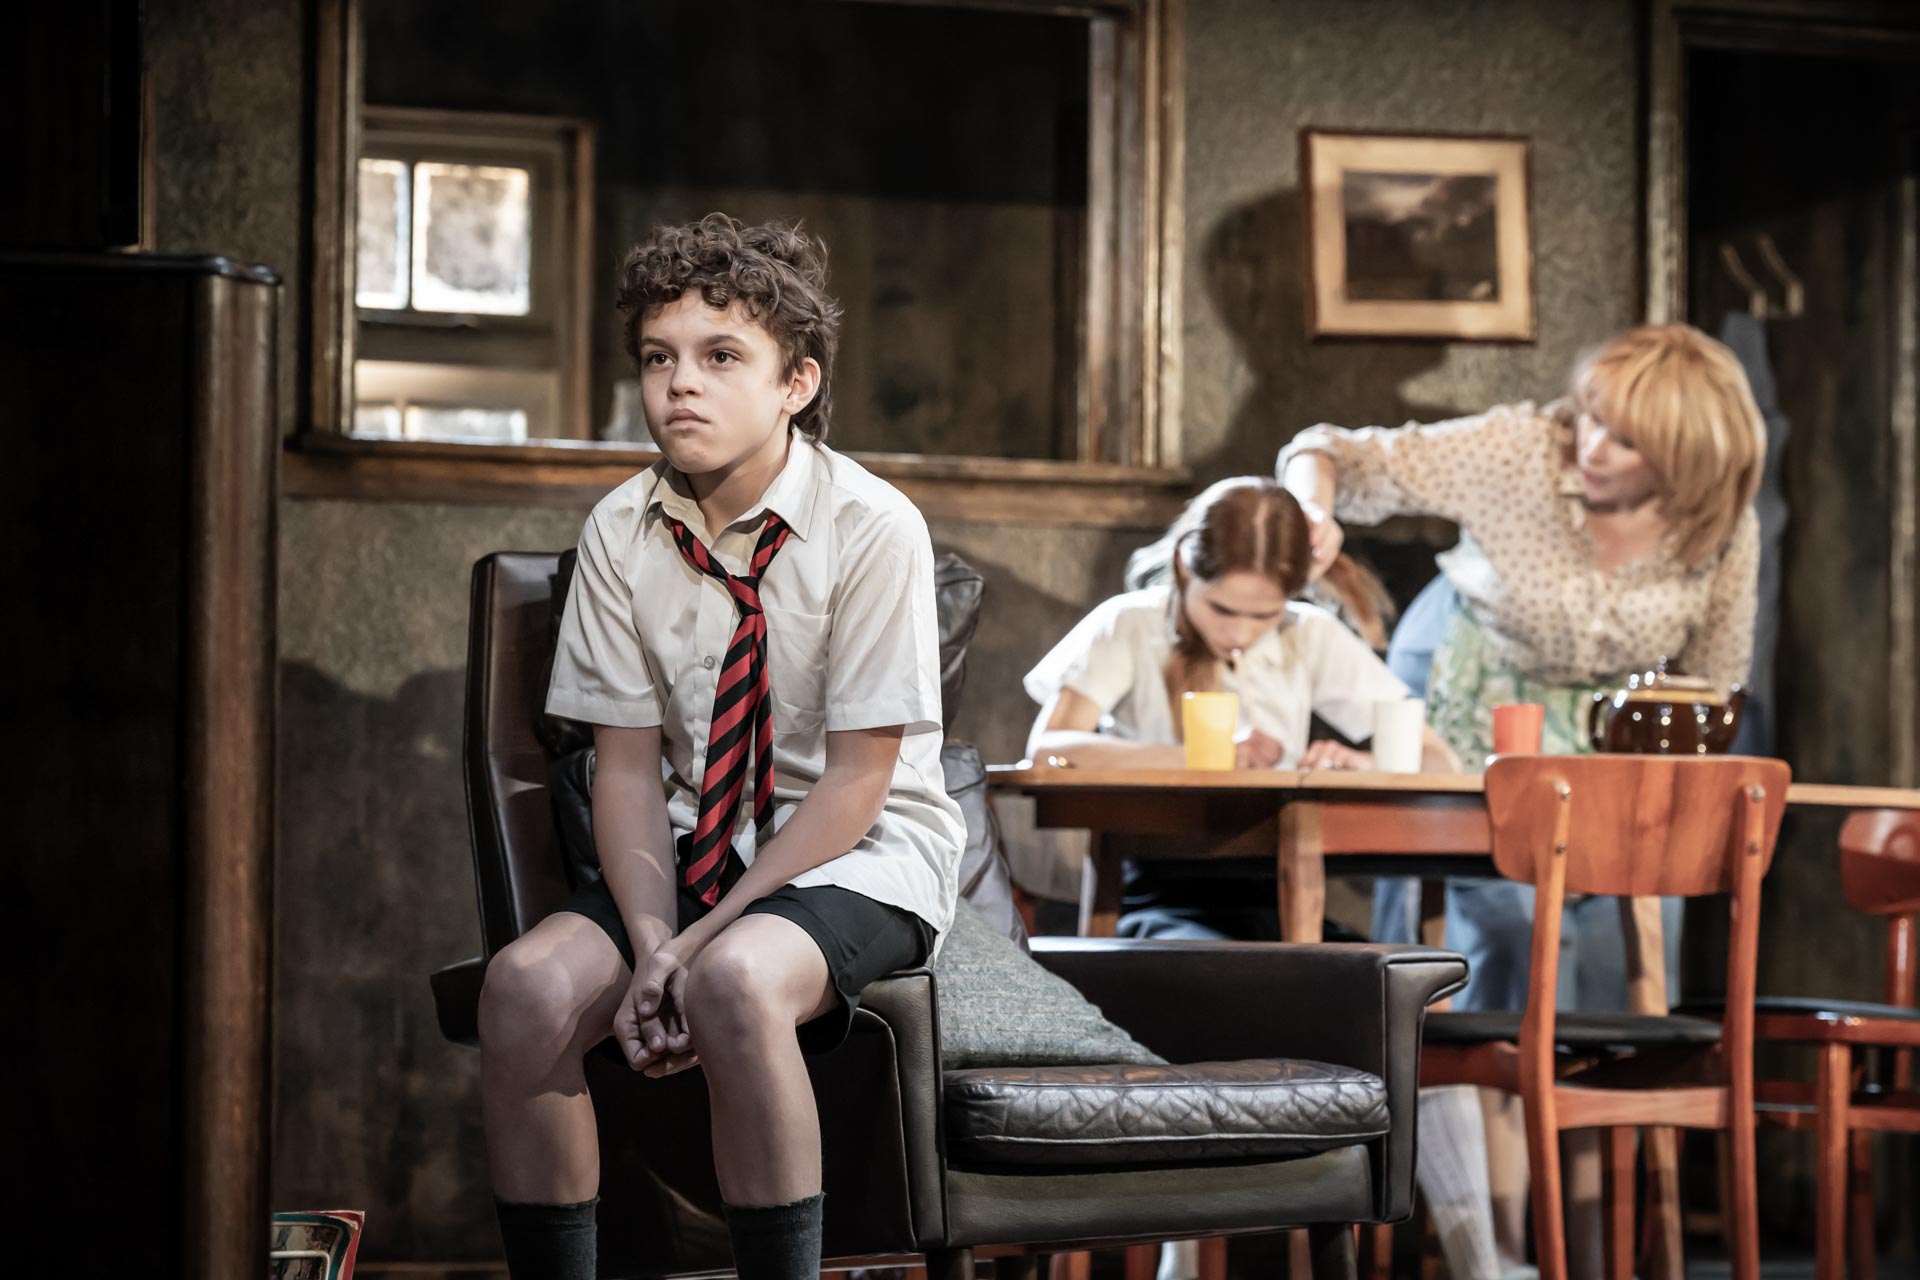 Noah Leggott (Jimmy) Ella Schrey-Yeats (Janet) Catherine Tate (Peggy) in The Enfield Haunting, Photo by Marc Brenner